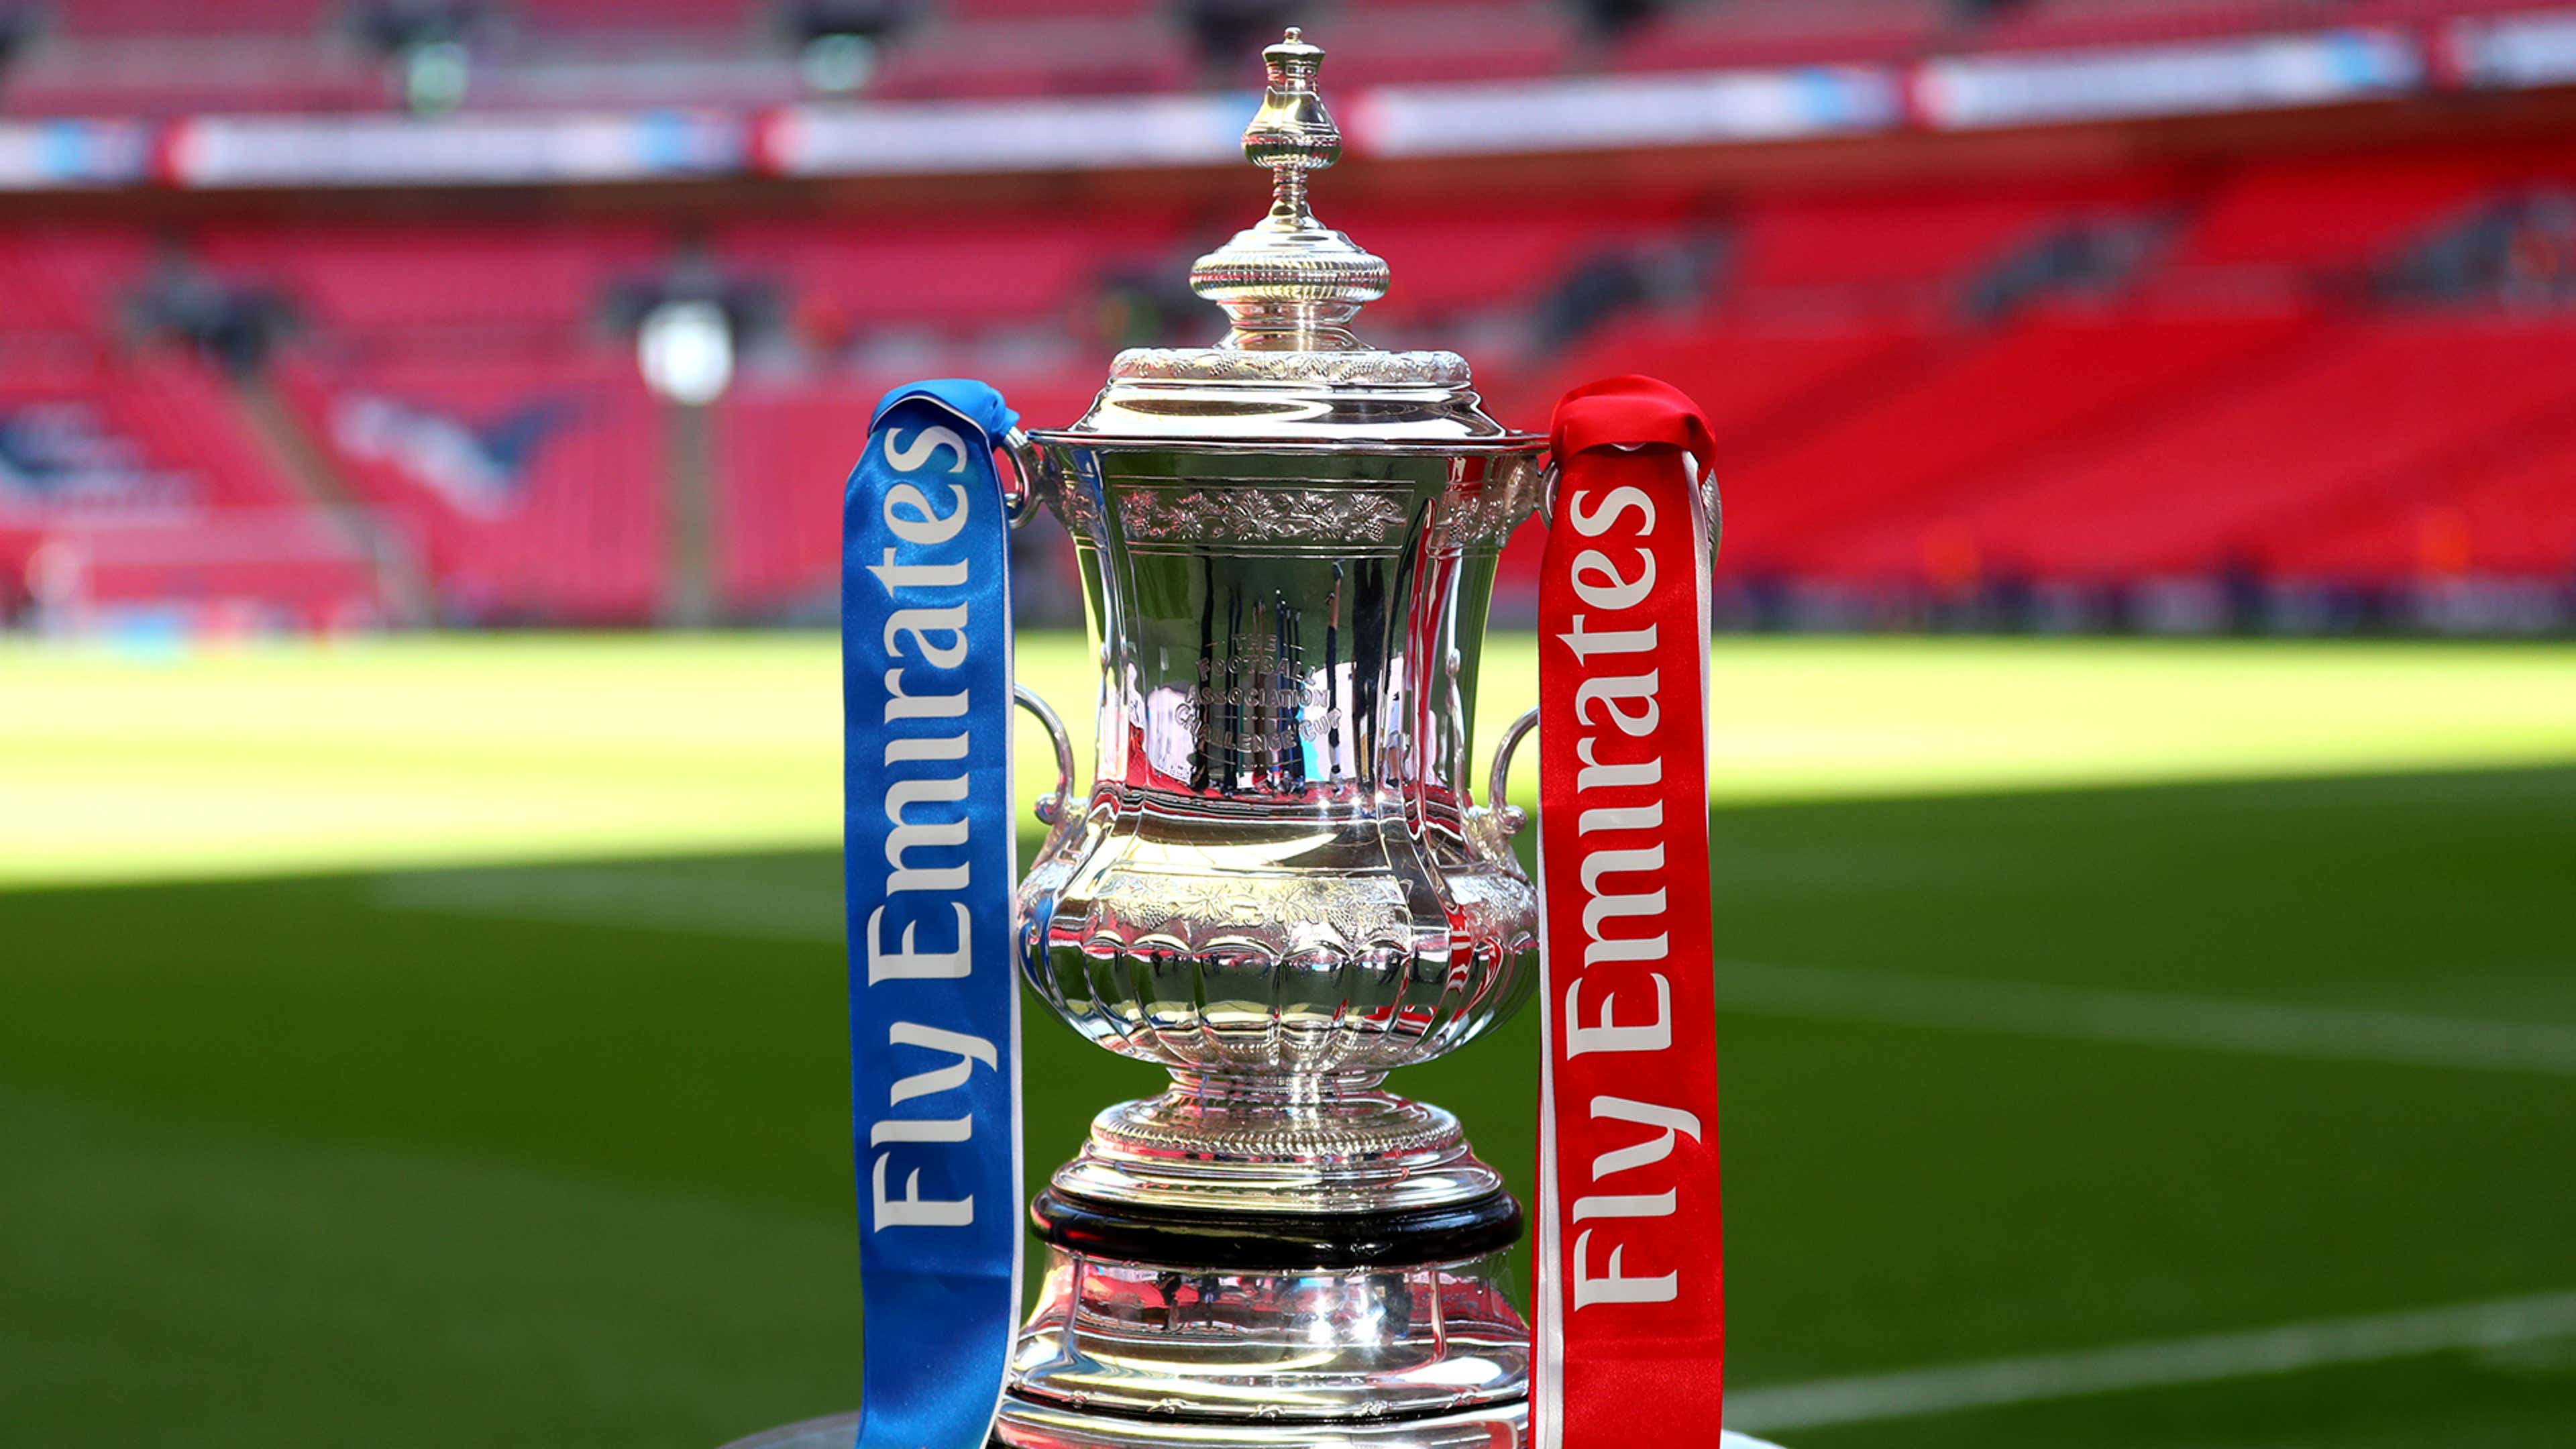  The image shows the FA Cup trophy with a red and blue ribbon with the words 'Fly Emirates' on each ribbon. The trophy is sitting on a green field with a blurred background of a stadium with red seats.